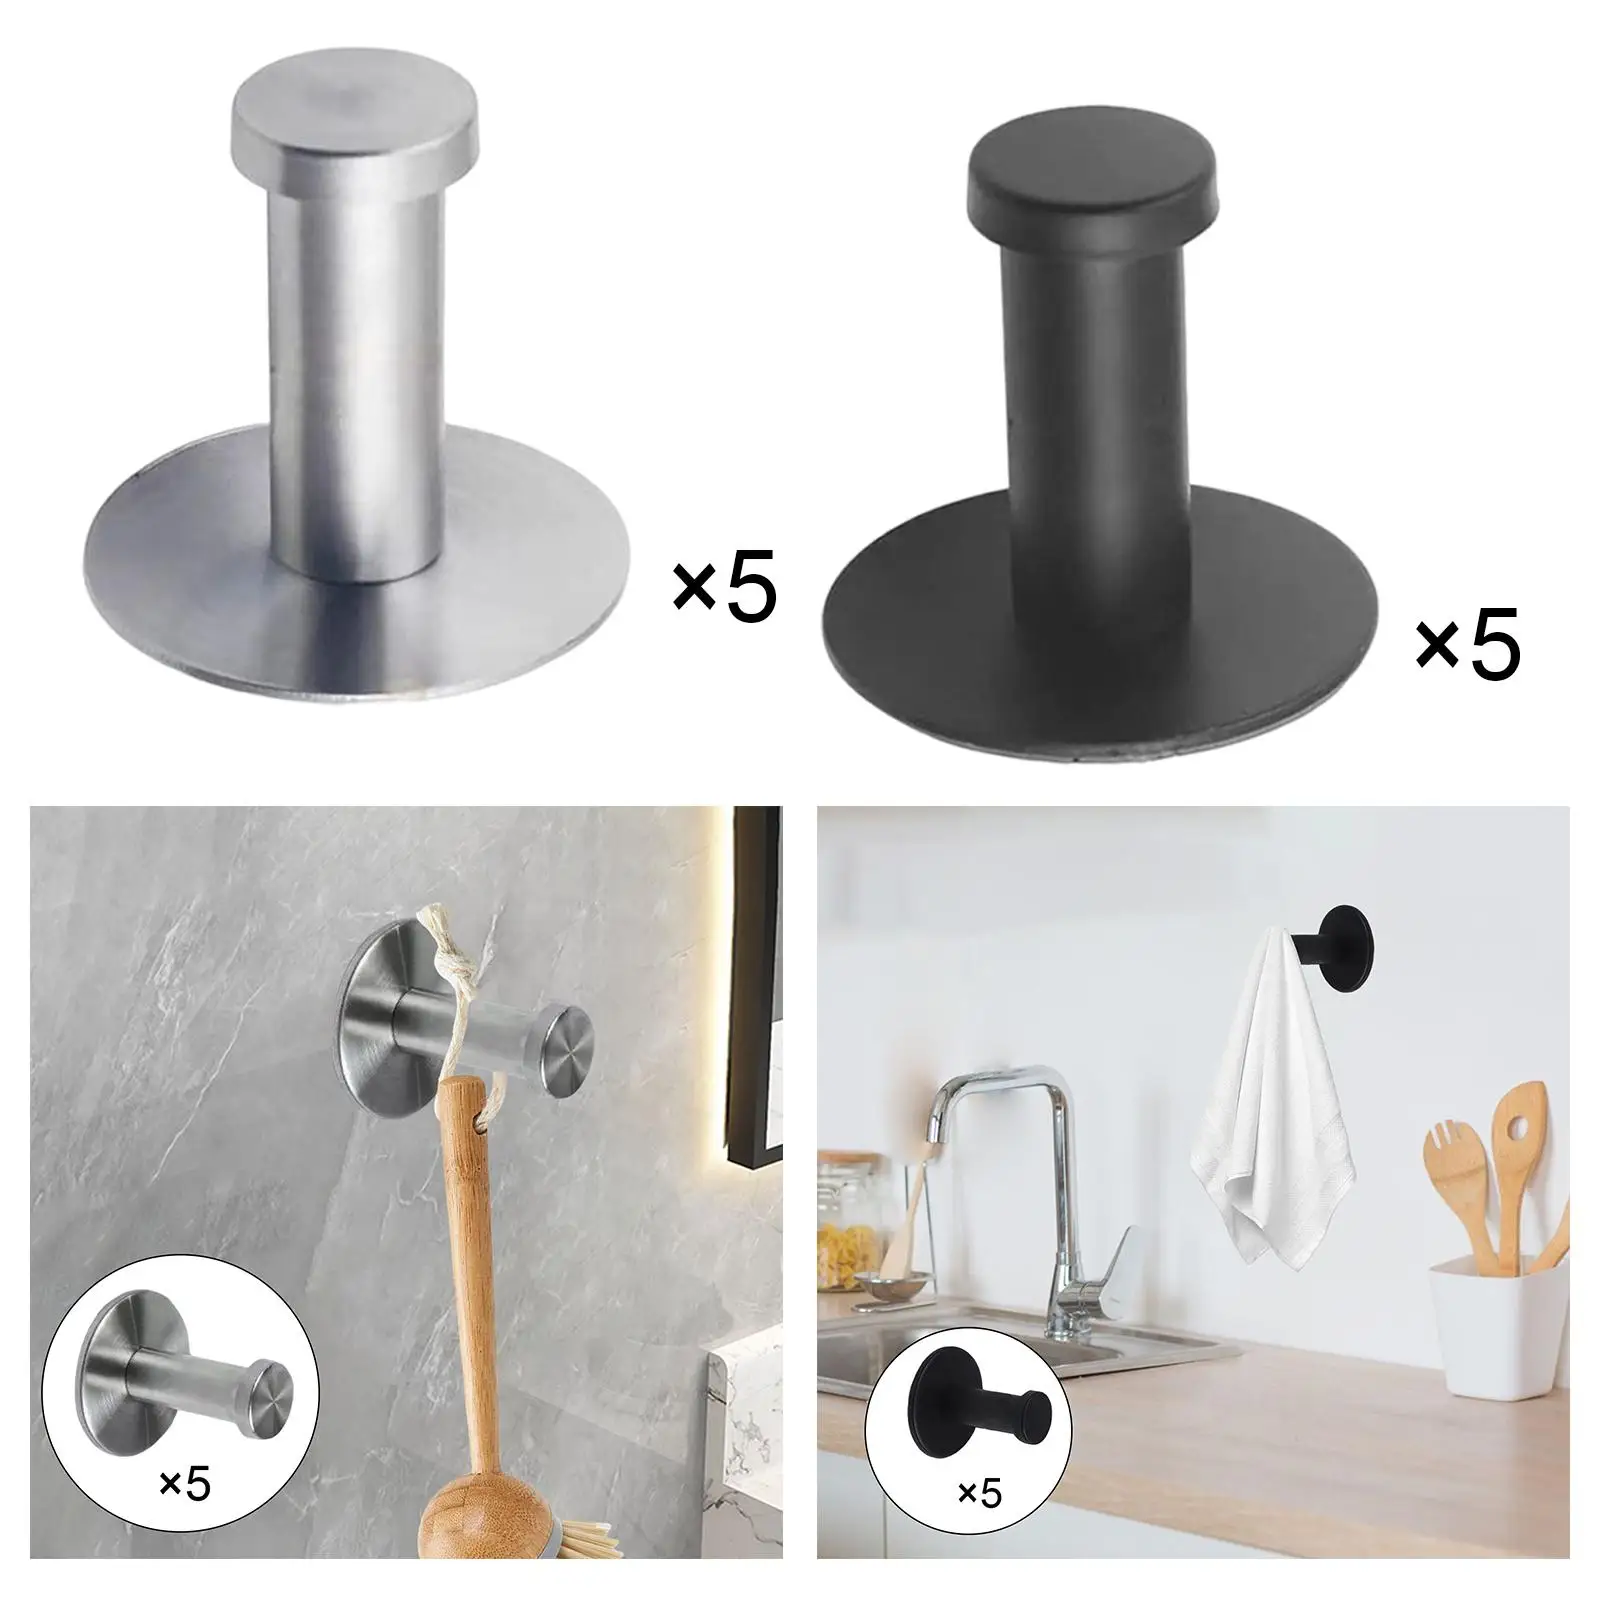 5x Heavy Duty Wall Hooks Hanger Reusable Towel Hooks Suction Cup Hooks for Shower Clothes Hook for Living Room Kitchen Door Home